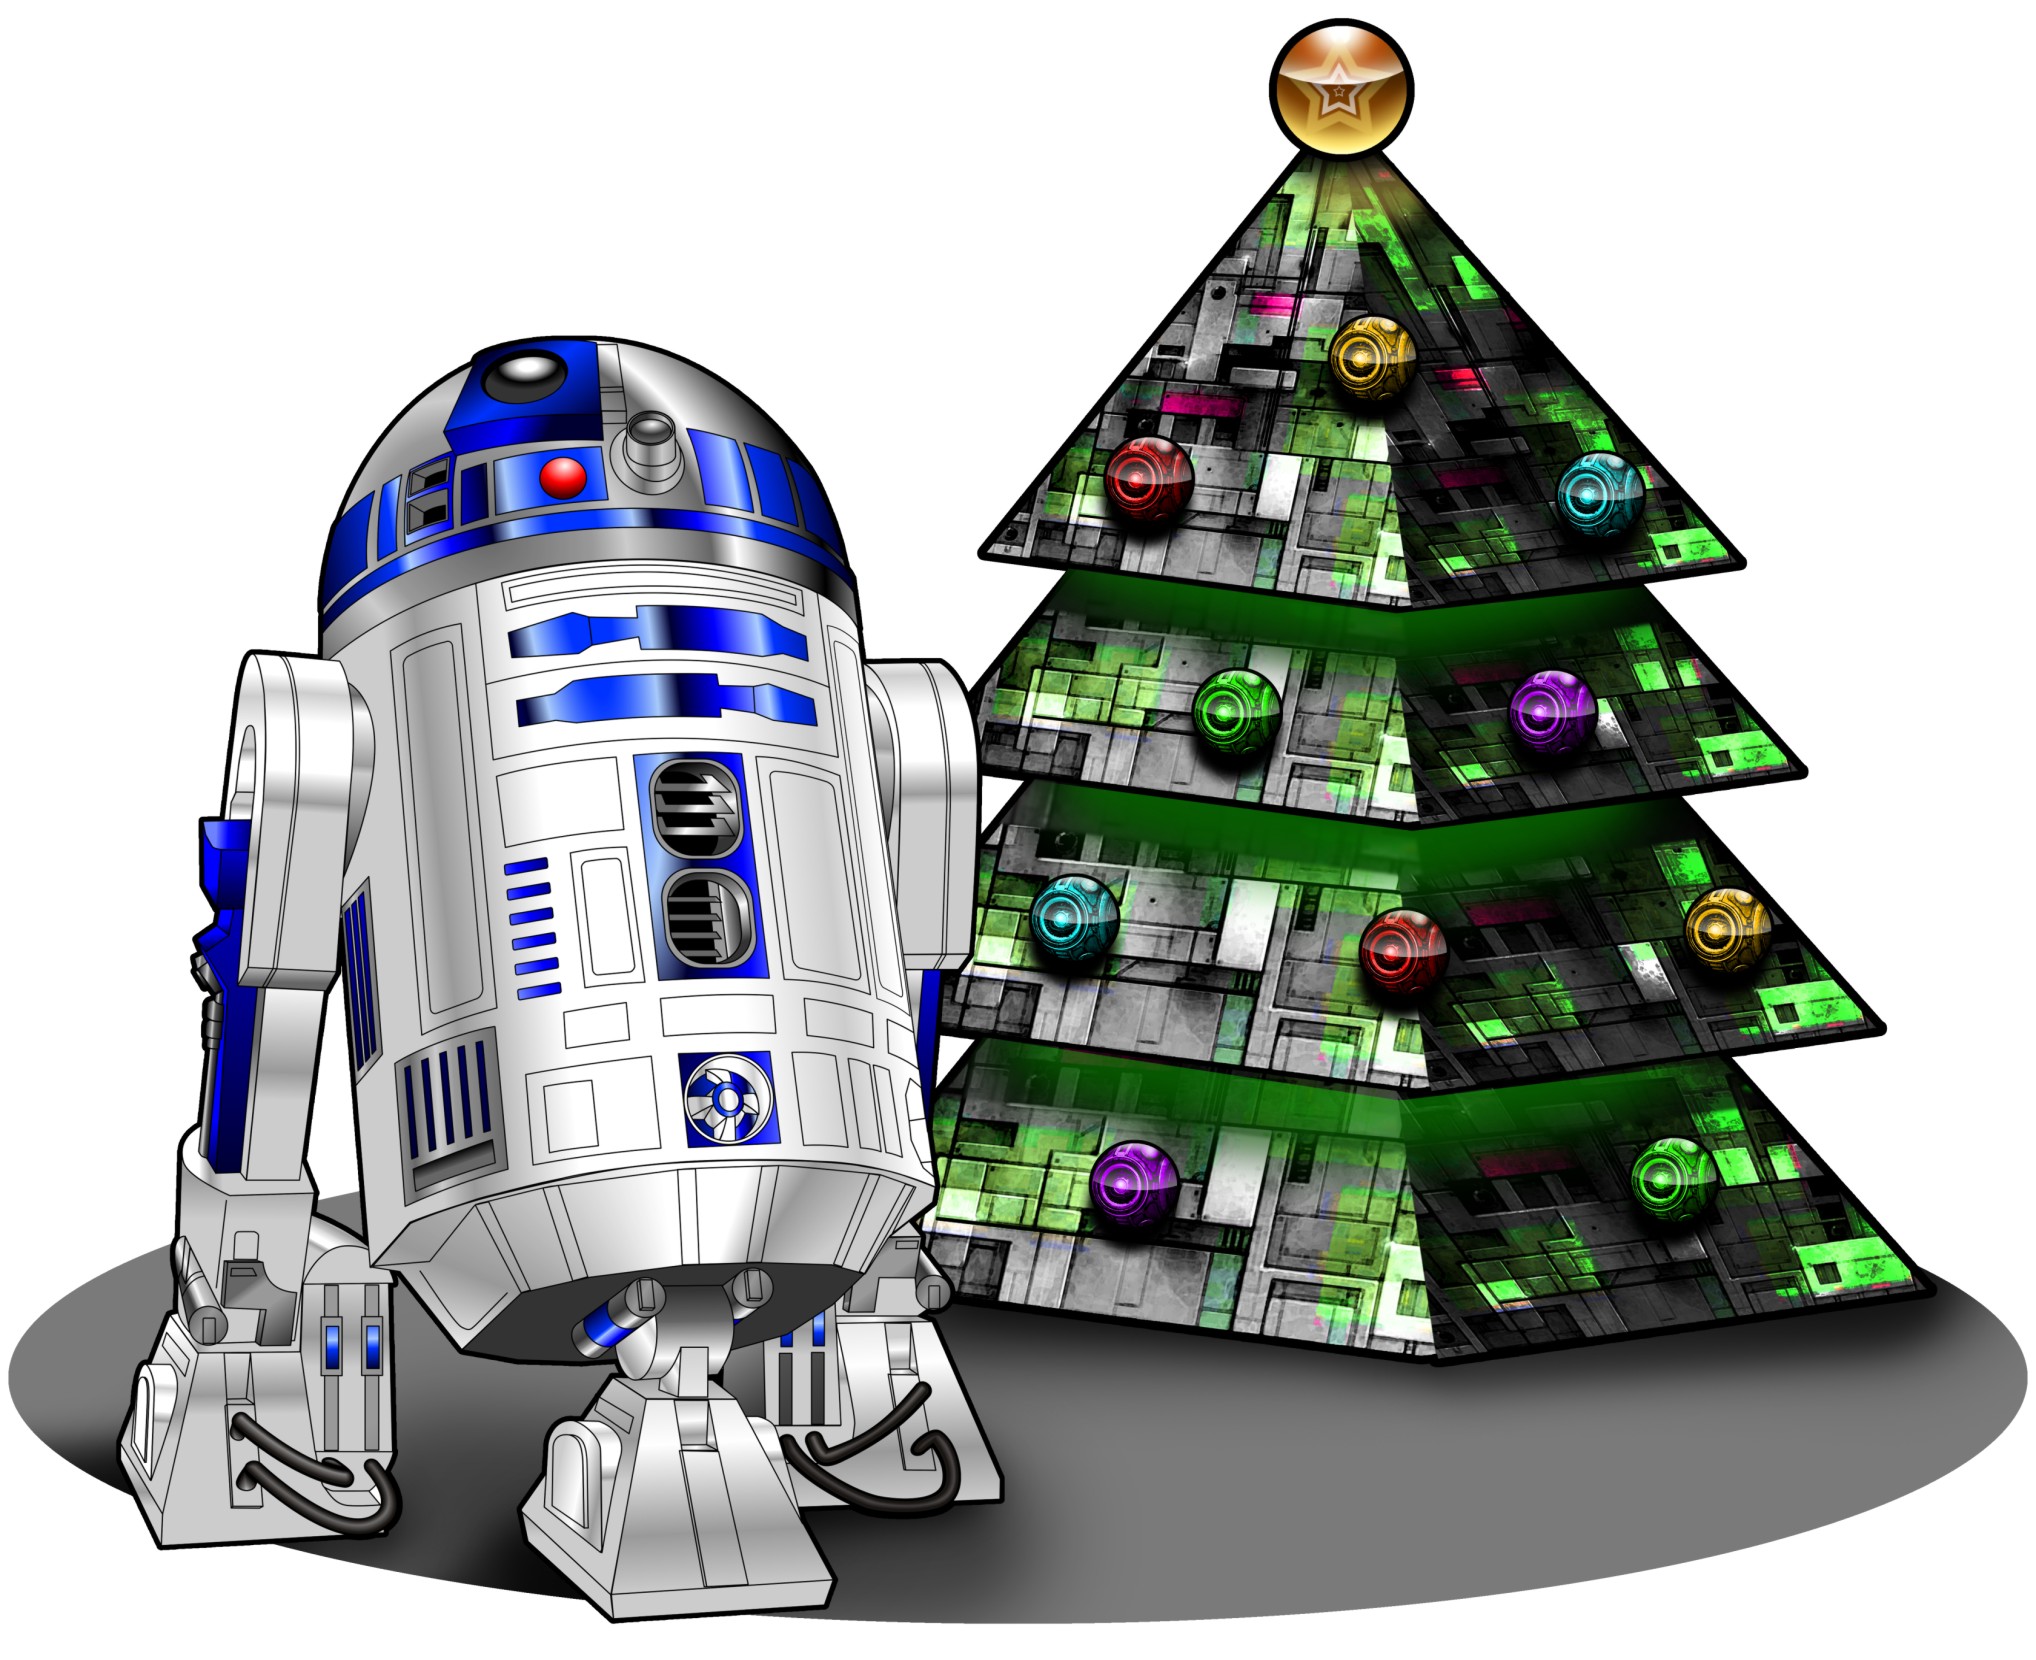 R2D2WithTree_-_small.jpg